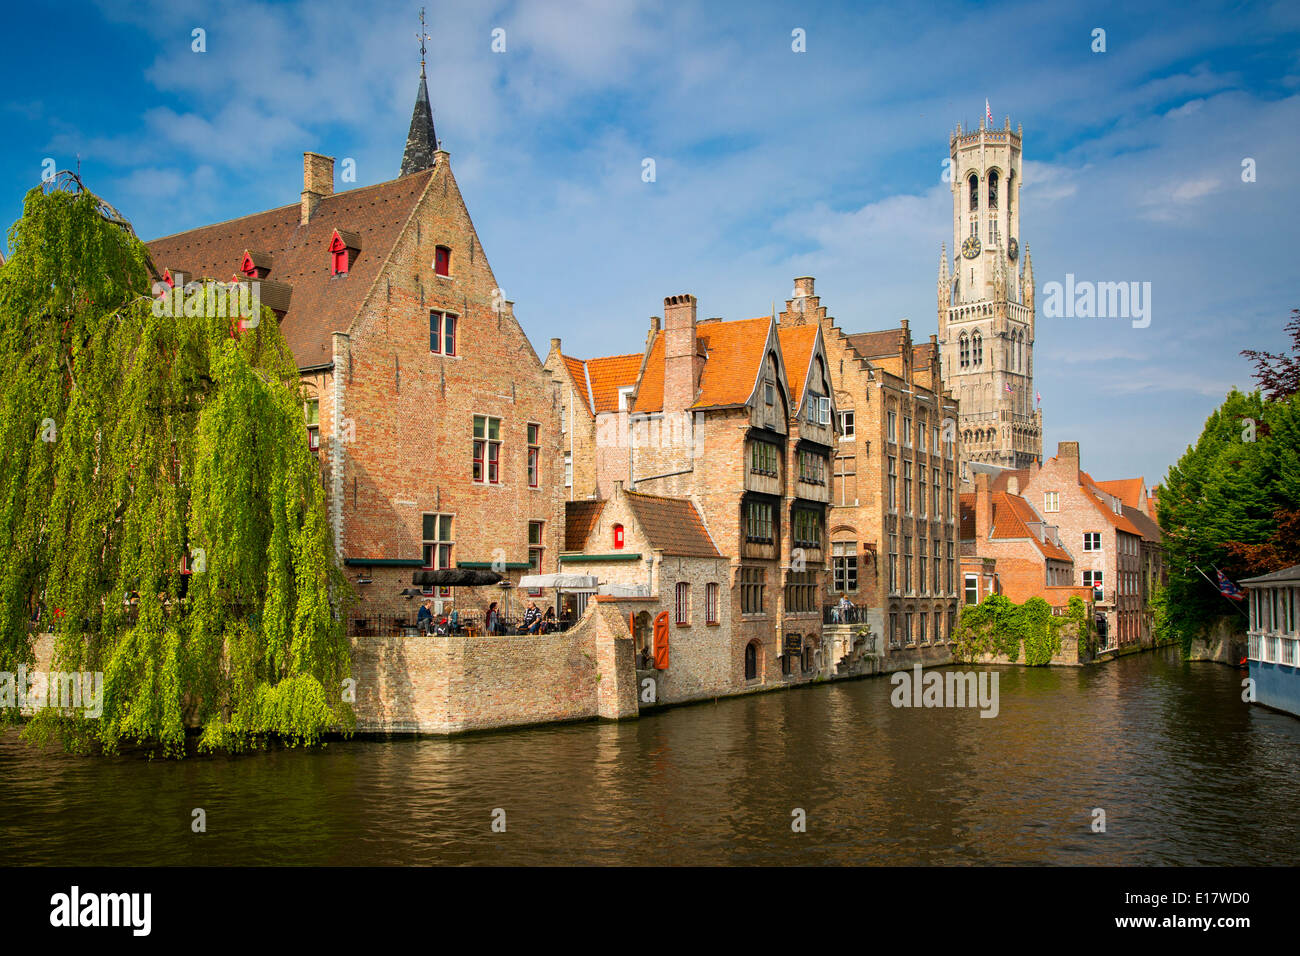 Belfry of Bruges towers over the buildings at the junction of the Groenerei and Dijver canals, Bruges, Belgium Stock Photo